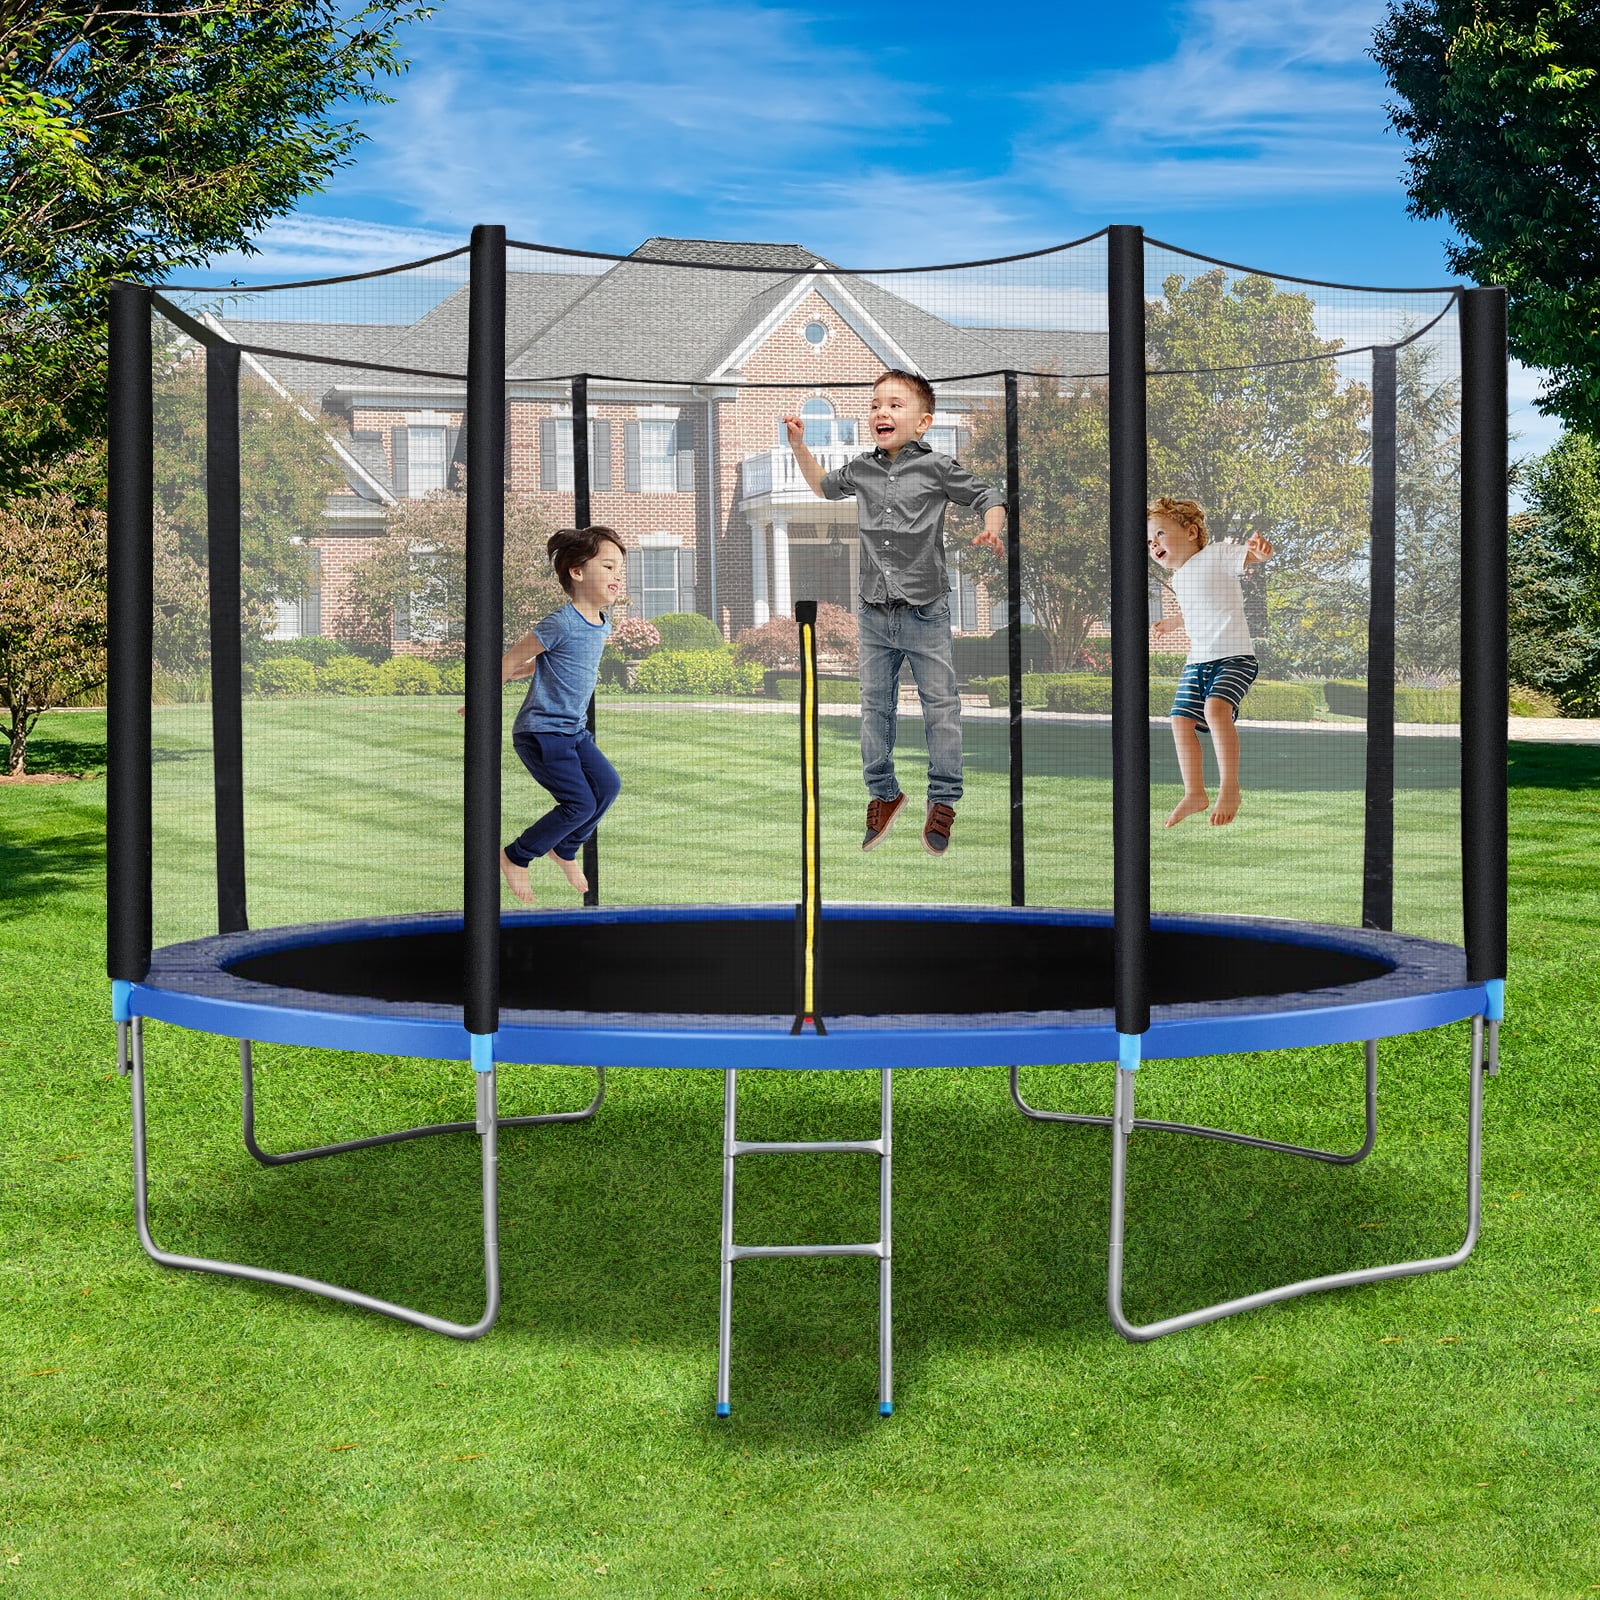 14 FT for Kids Adults Max Weight 450 LBS with Recreation Trampoline & Enclosure Net Provide Bounce Backyards Outdoor - Walmart.com